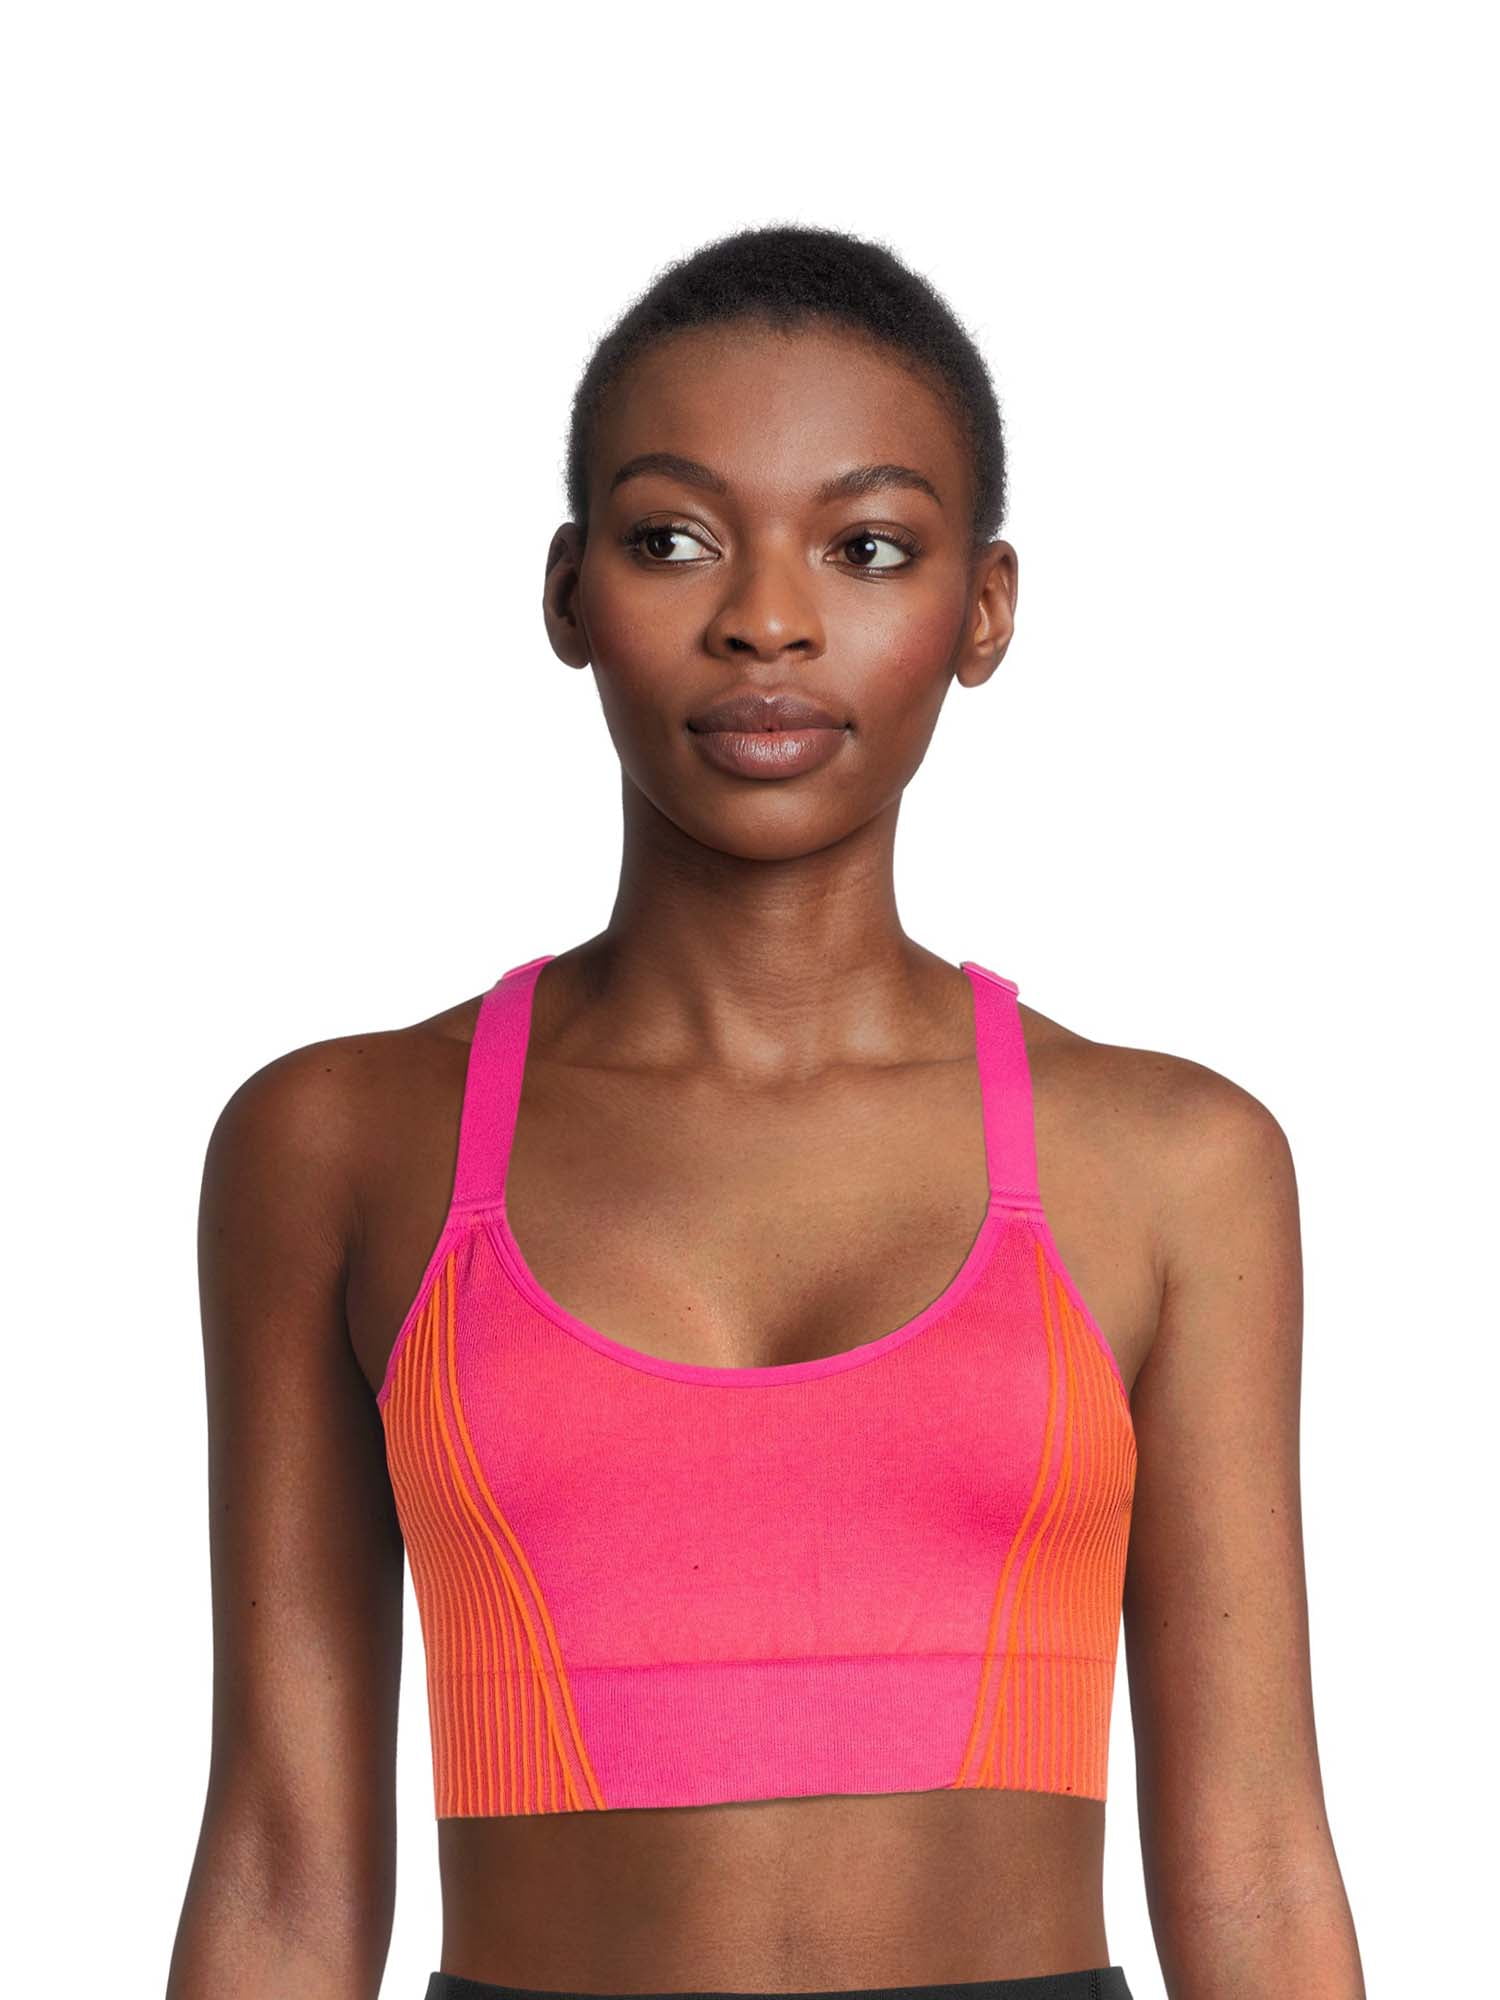 Mermaid Curve Women's Clothes Keyhole in the Back Sports Bras